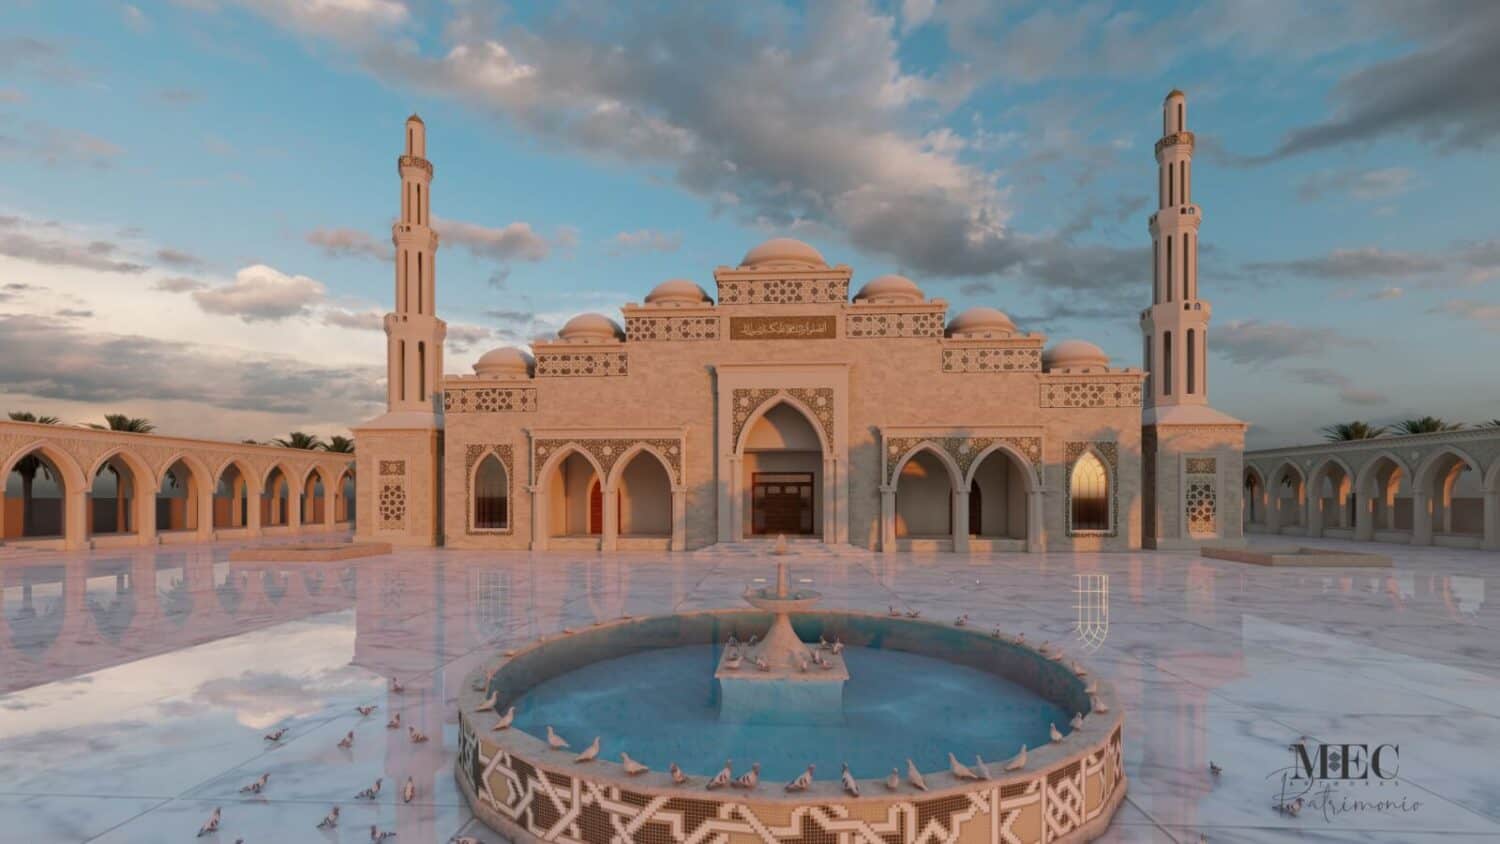 Moroccan Mosaic Mosque Calligraphy Tile art 3D render exterior with fountain